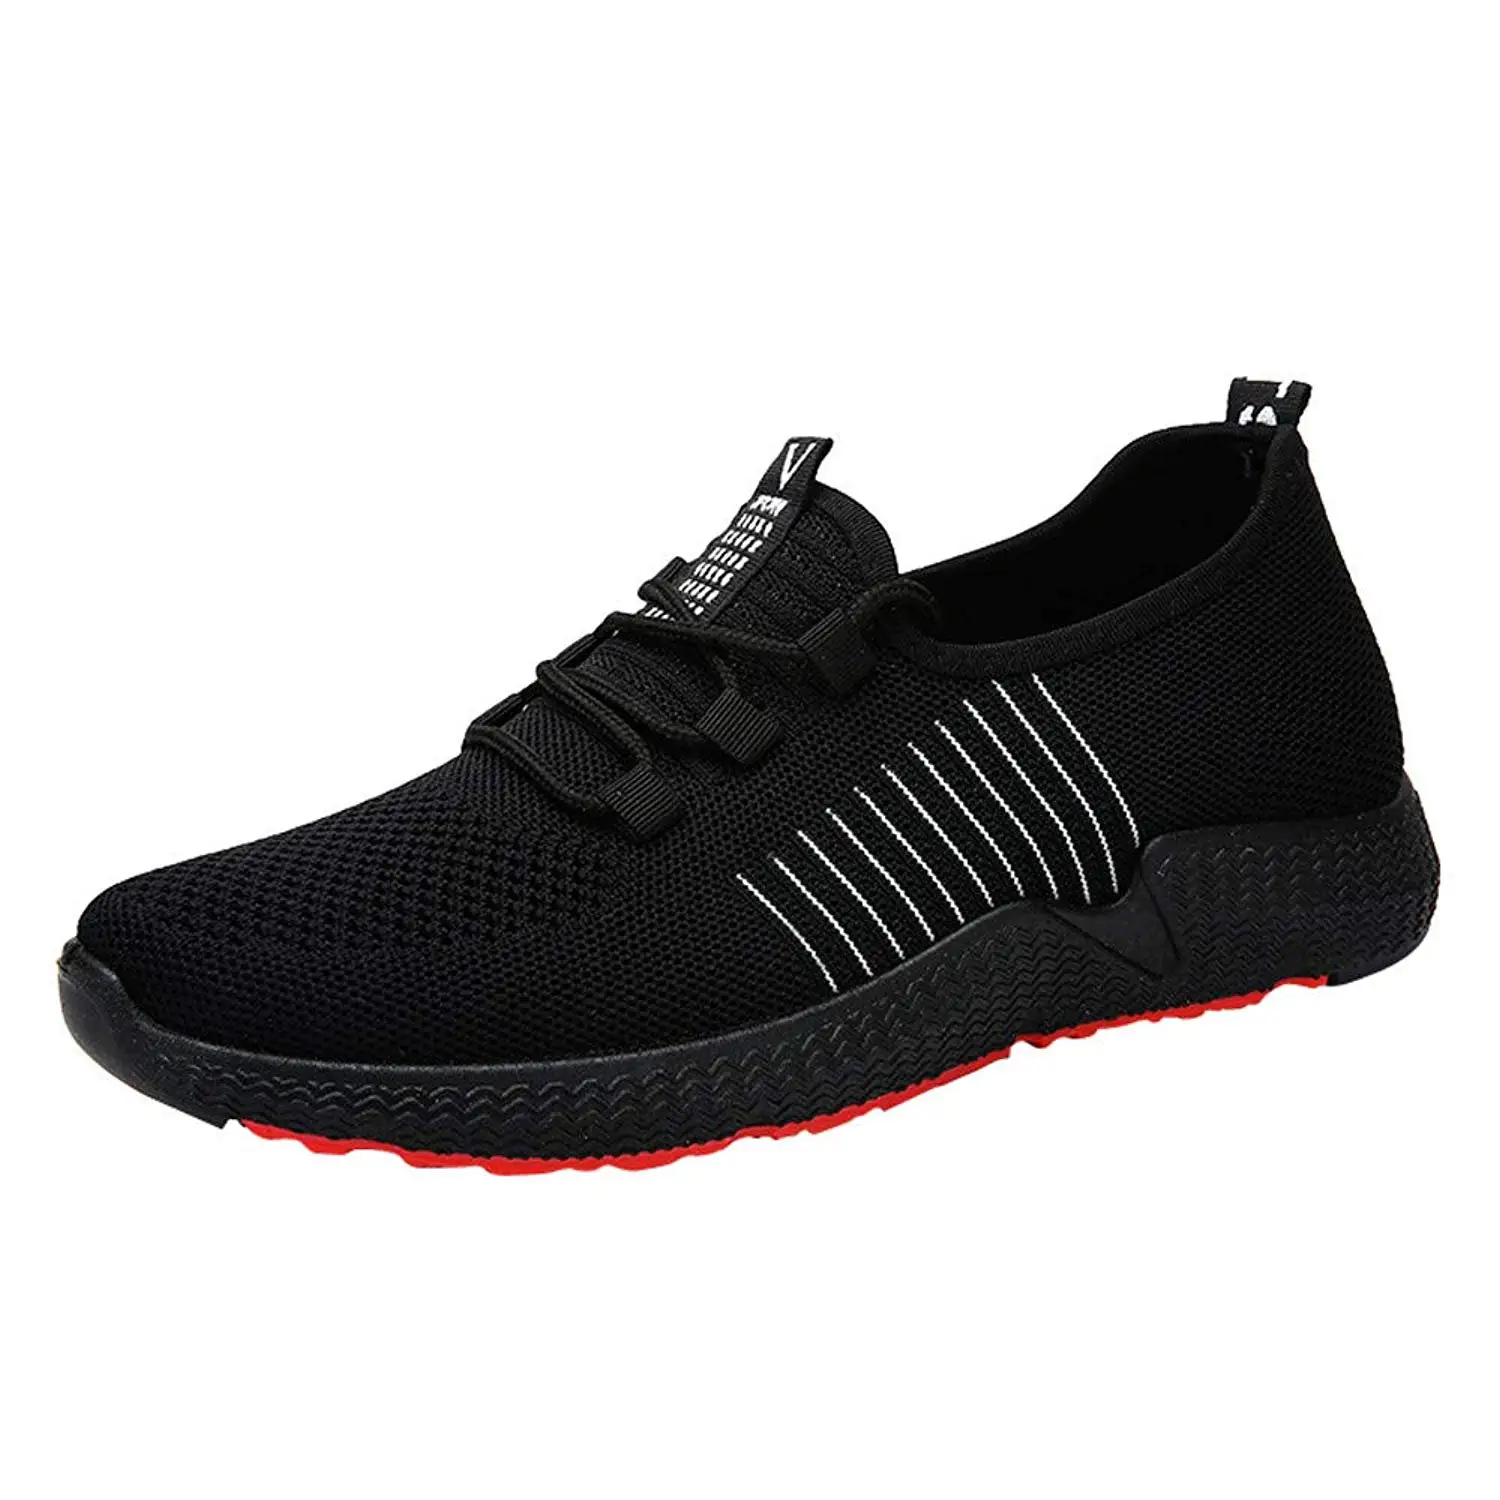 Buy Sneakers for Men,Clearance Sale!Caopixx Mens Ultra ...